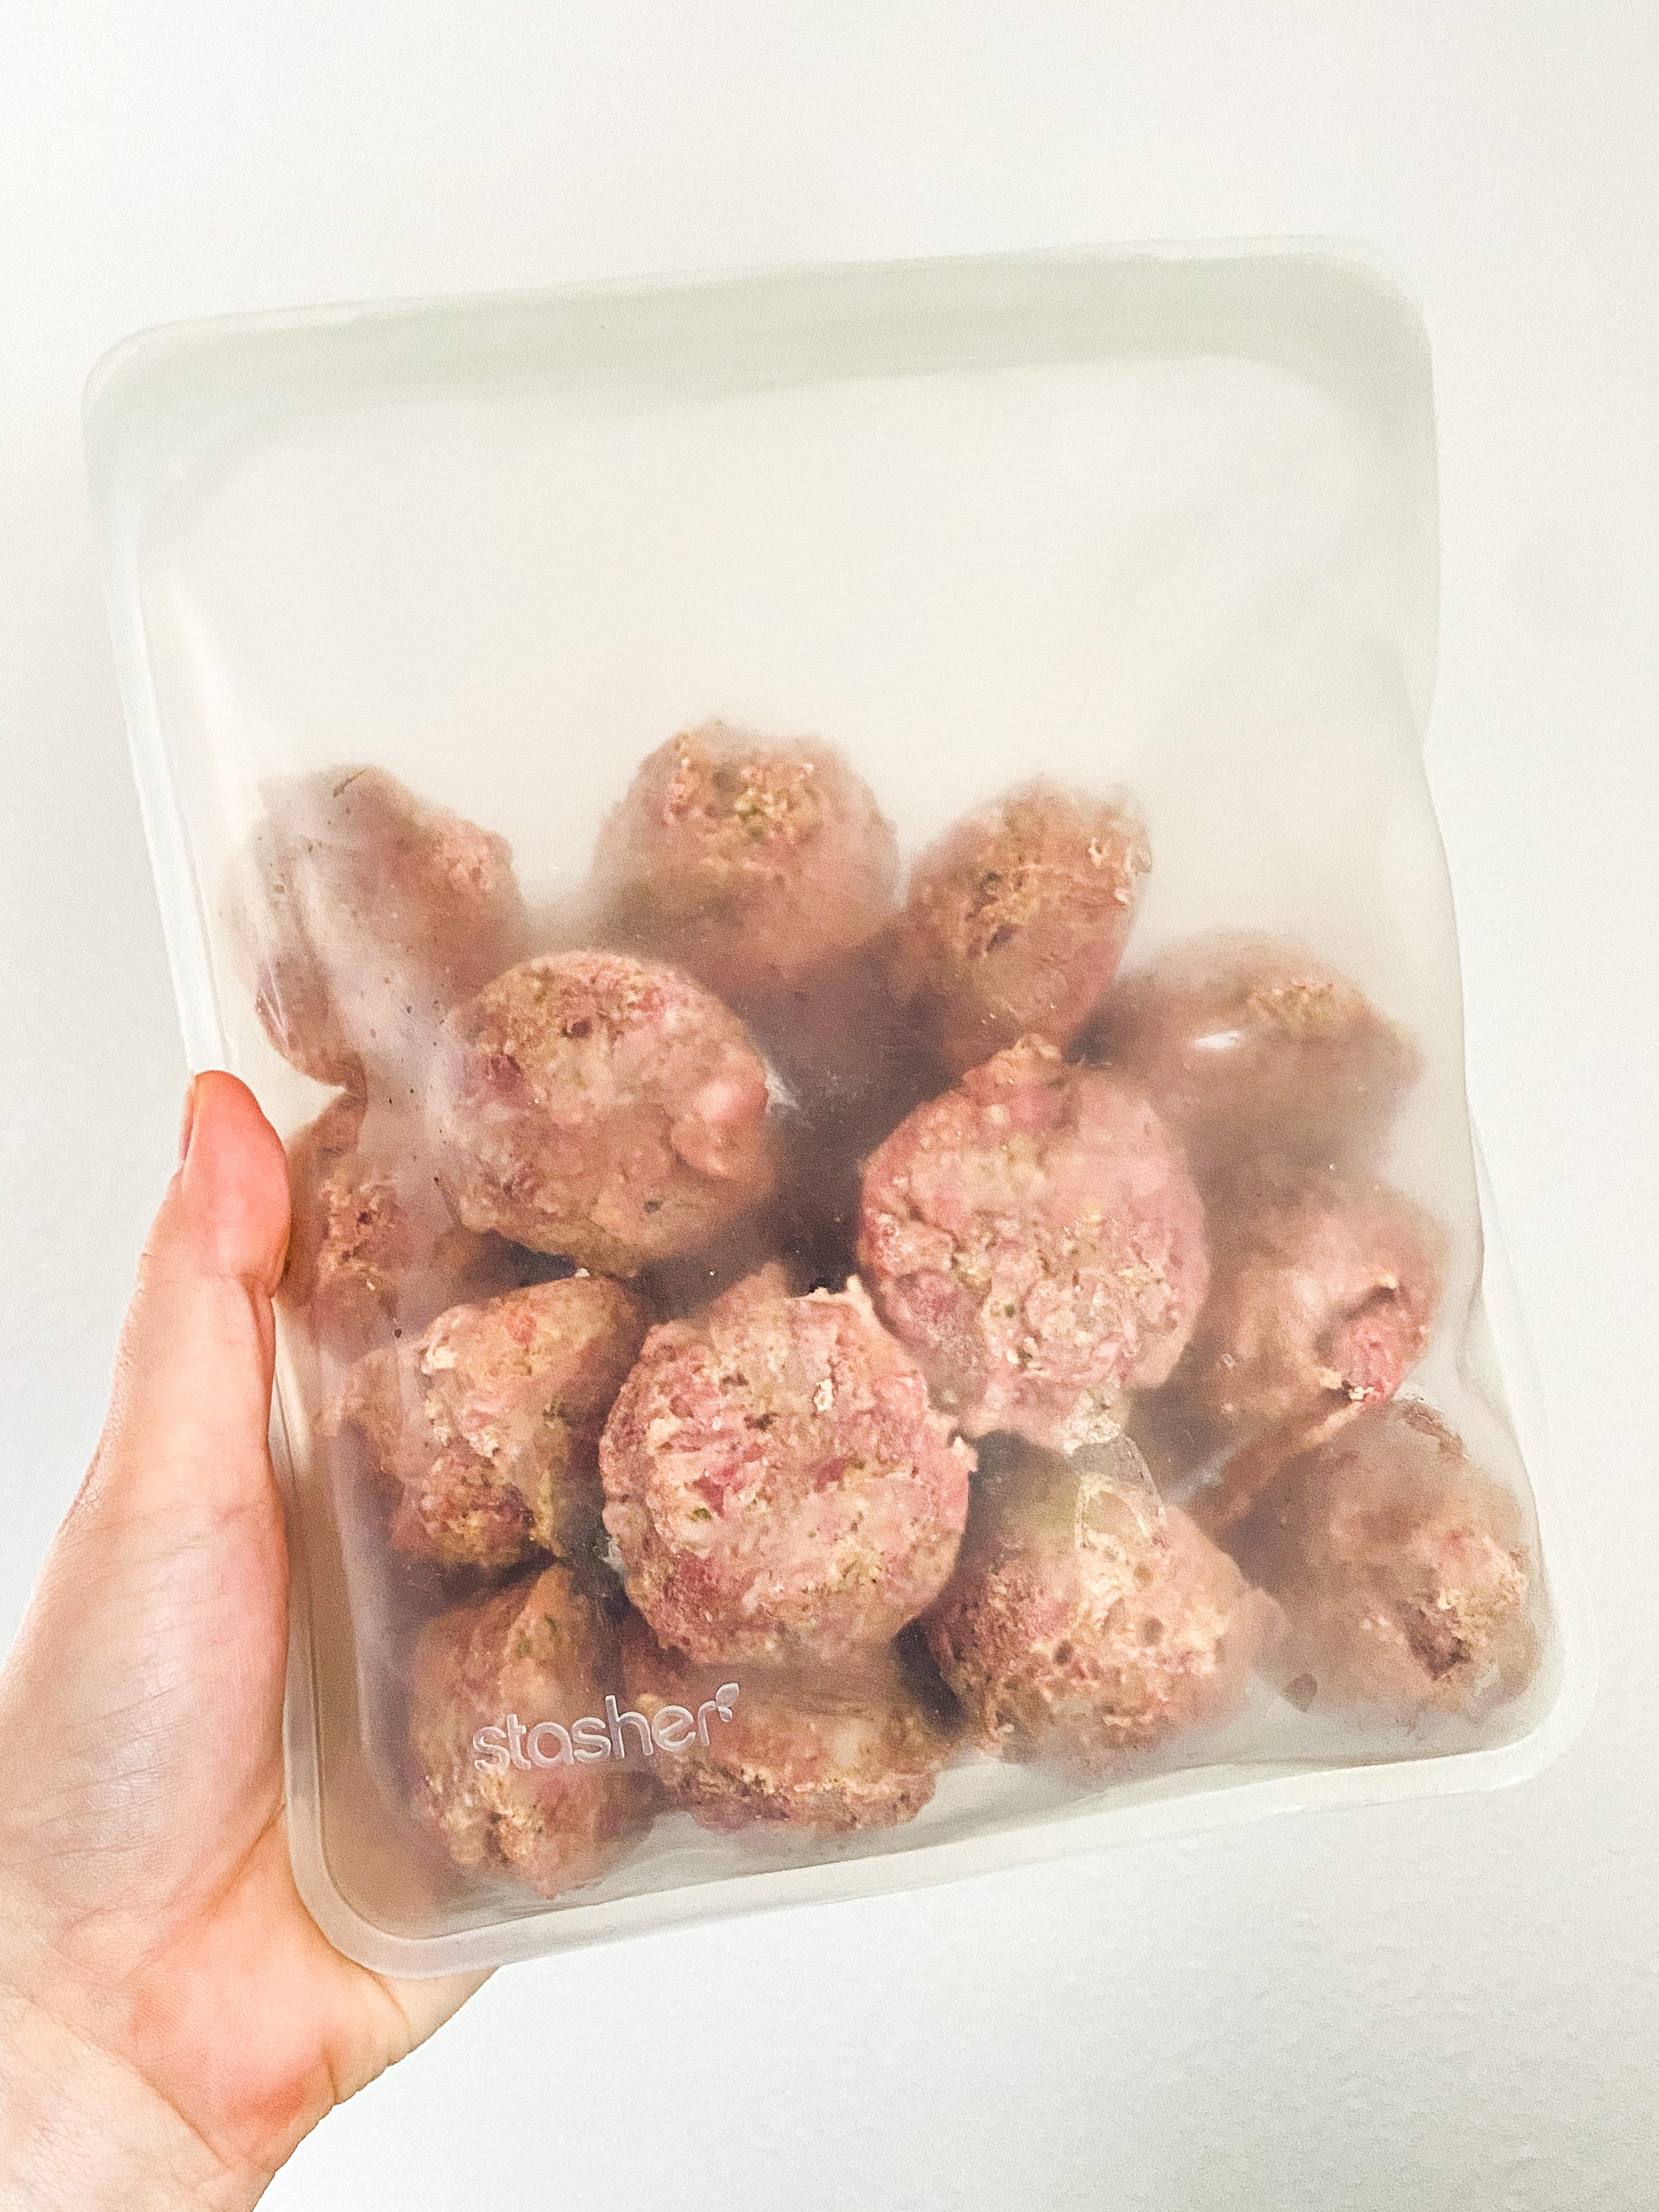 frozen meatballs transferred to a stasher bag freezer safe container.